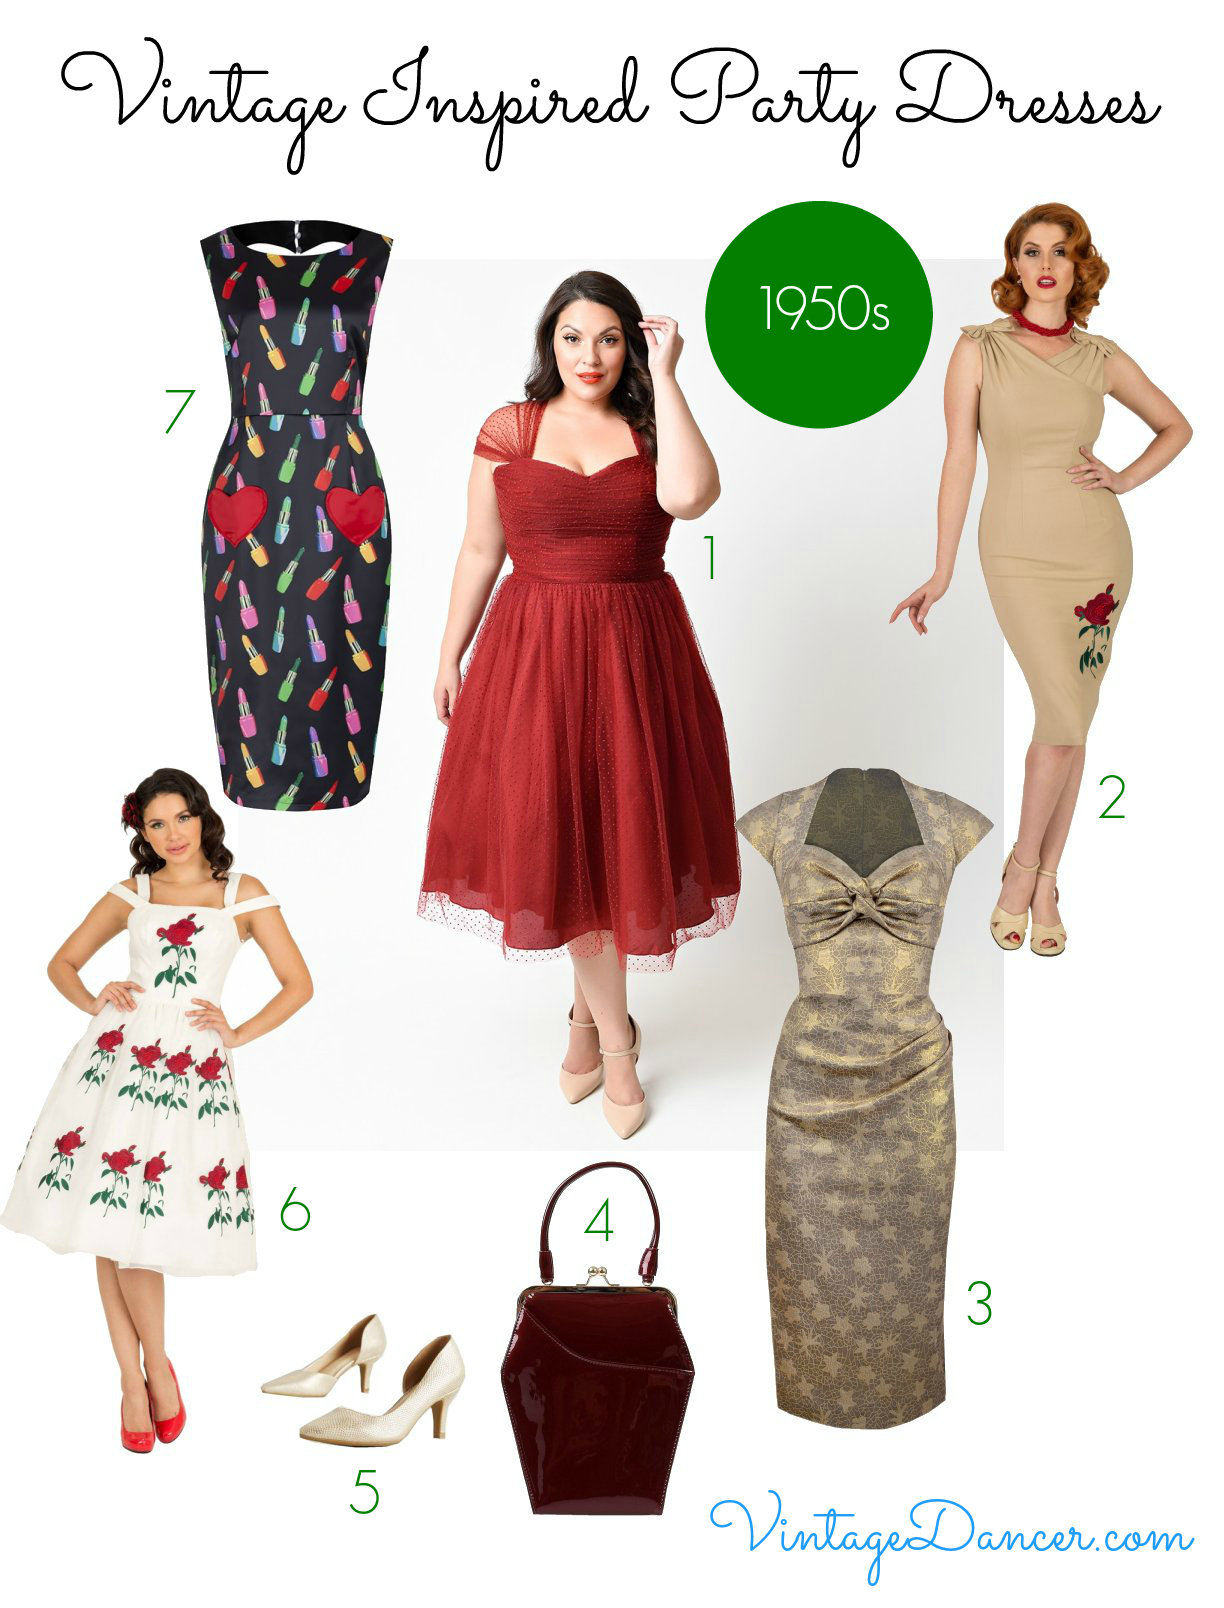 Vintage Inspired Party Dresses